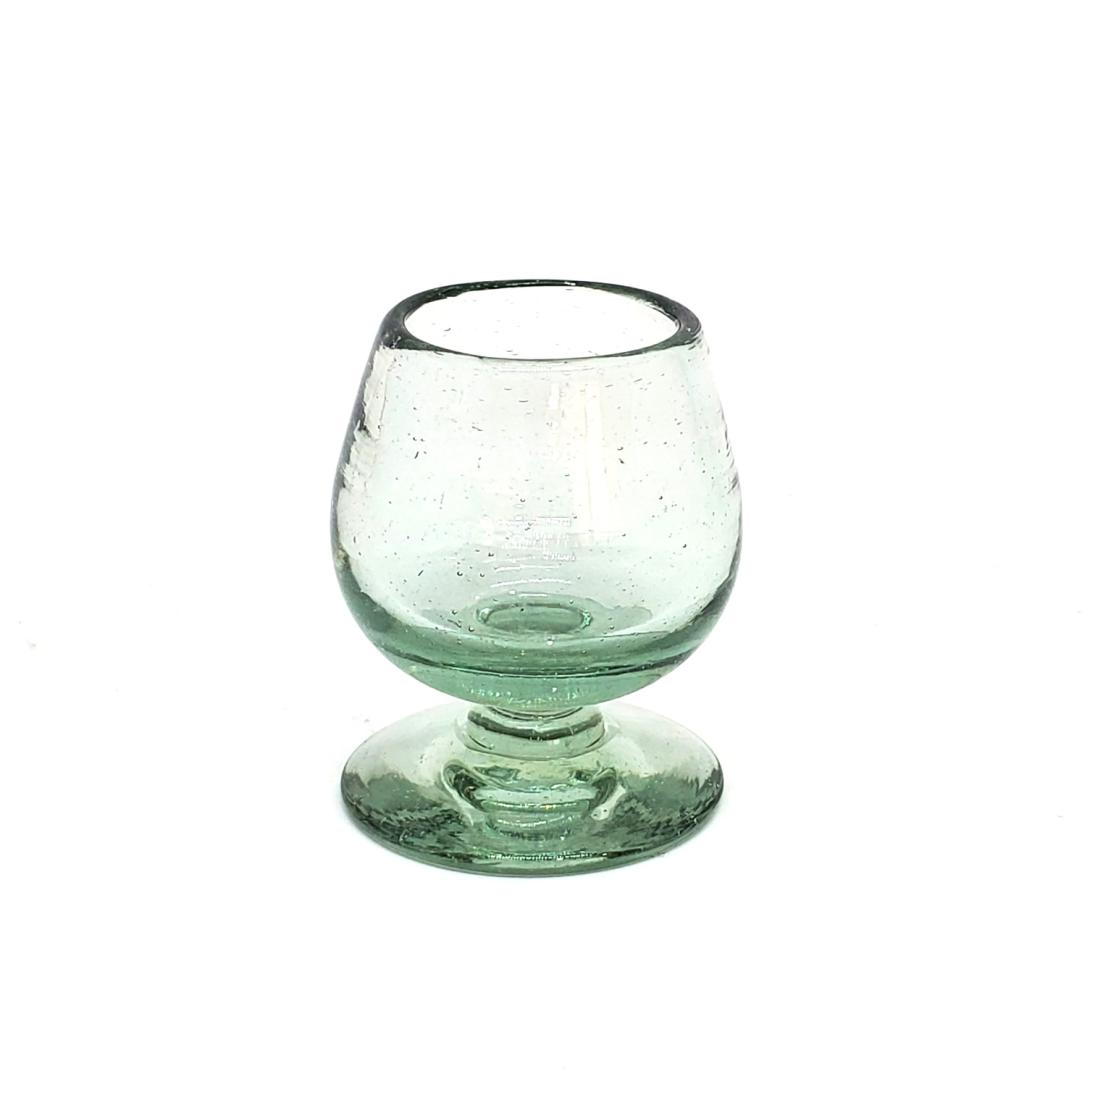 Wholesale Clear Glassware / Clear 2.5 oz Tequila Sippers   / Sip your favourite tequila or mezcal with these iconic clear handcrafted sipping glasses. You may also serve lemon juice or other chasers.